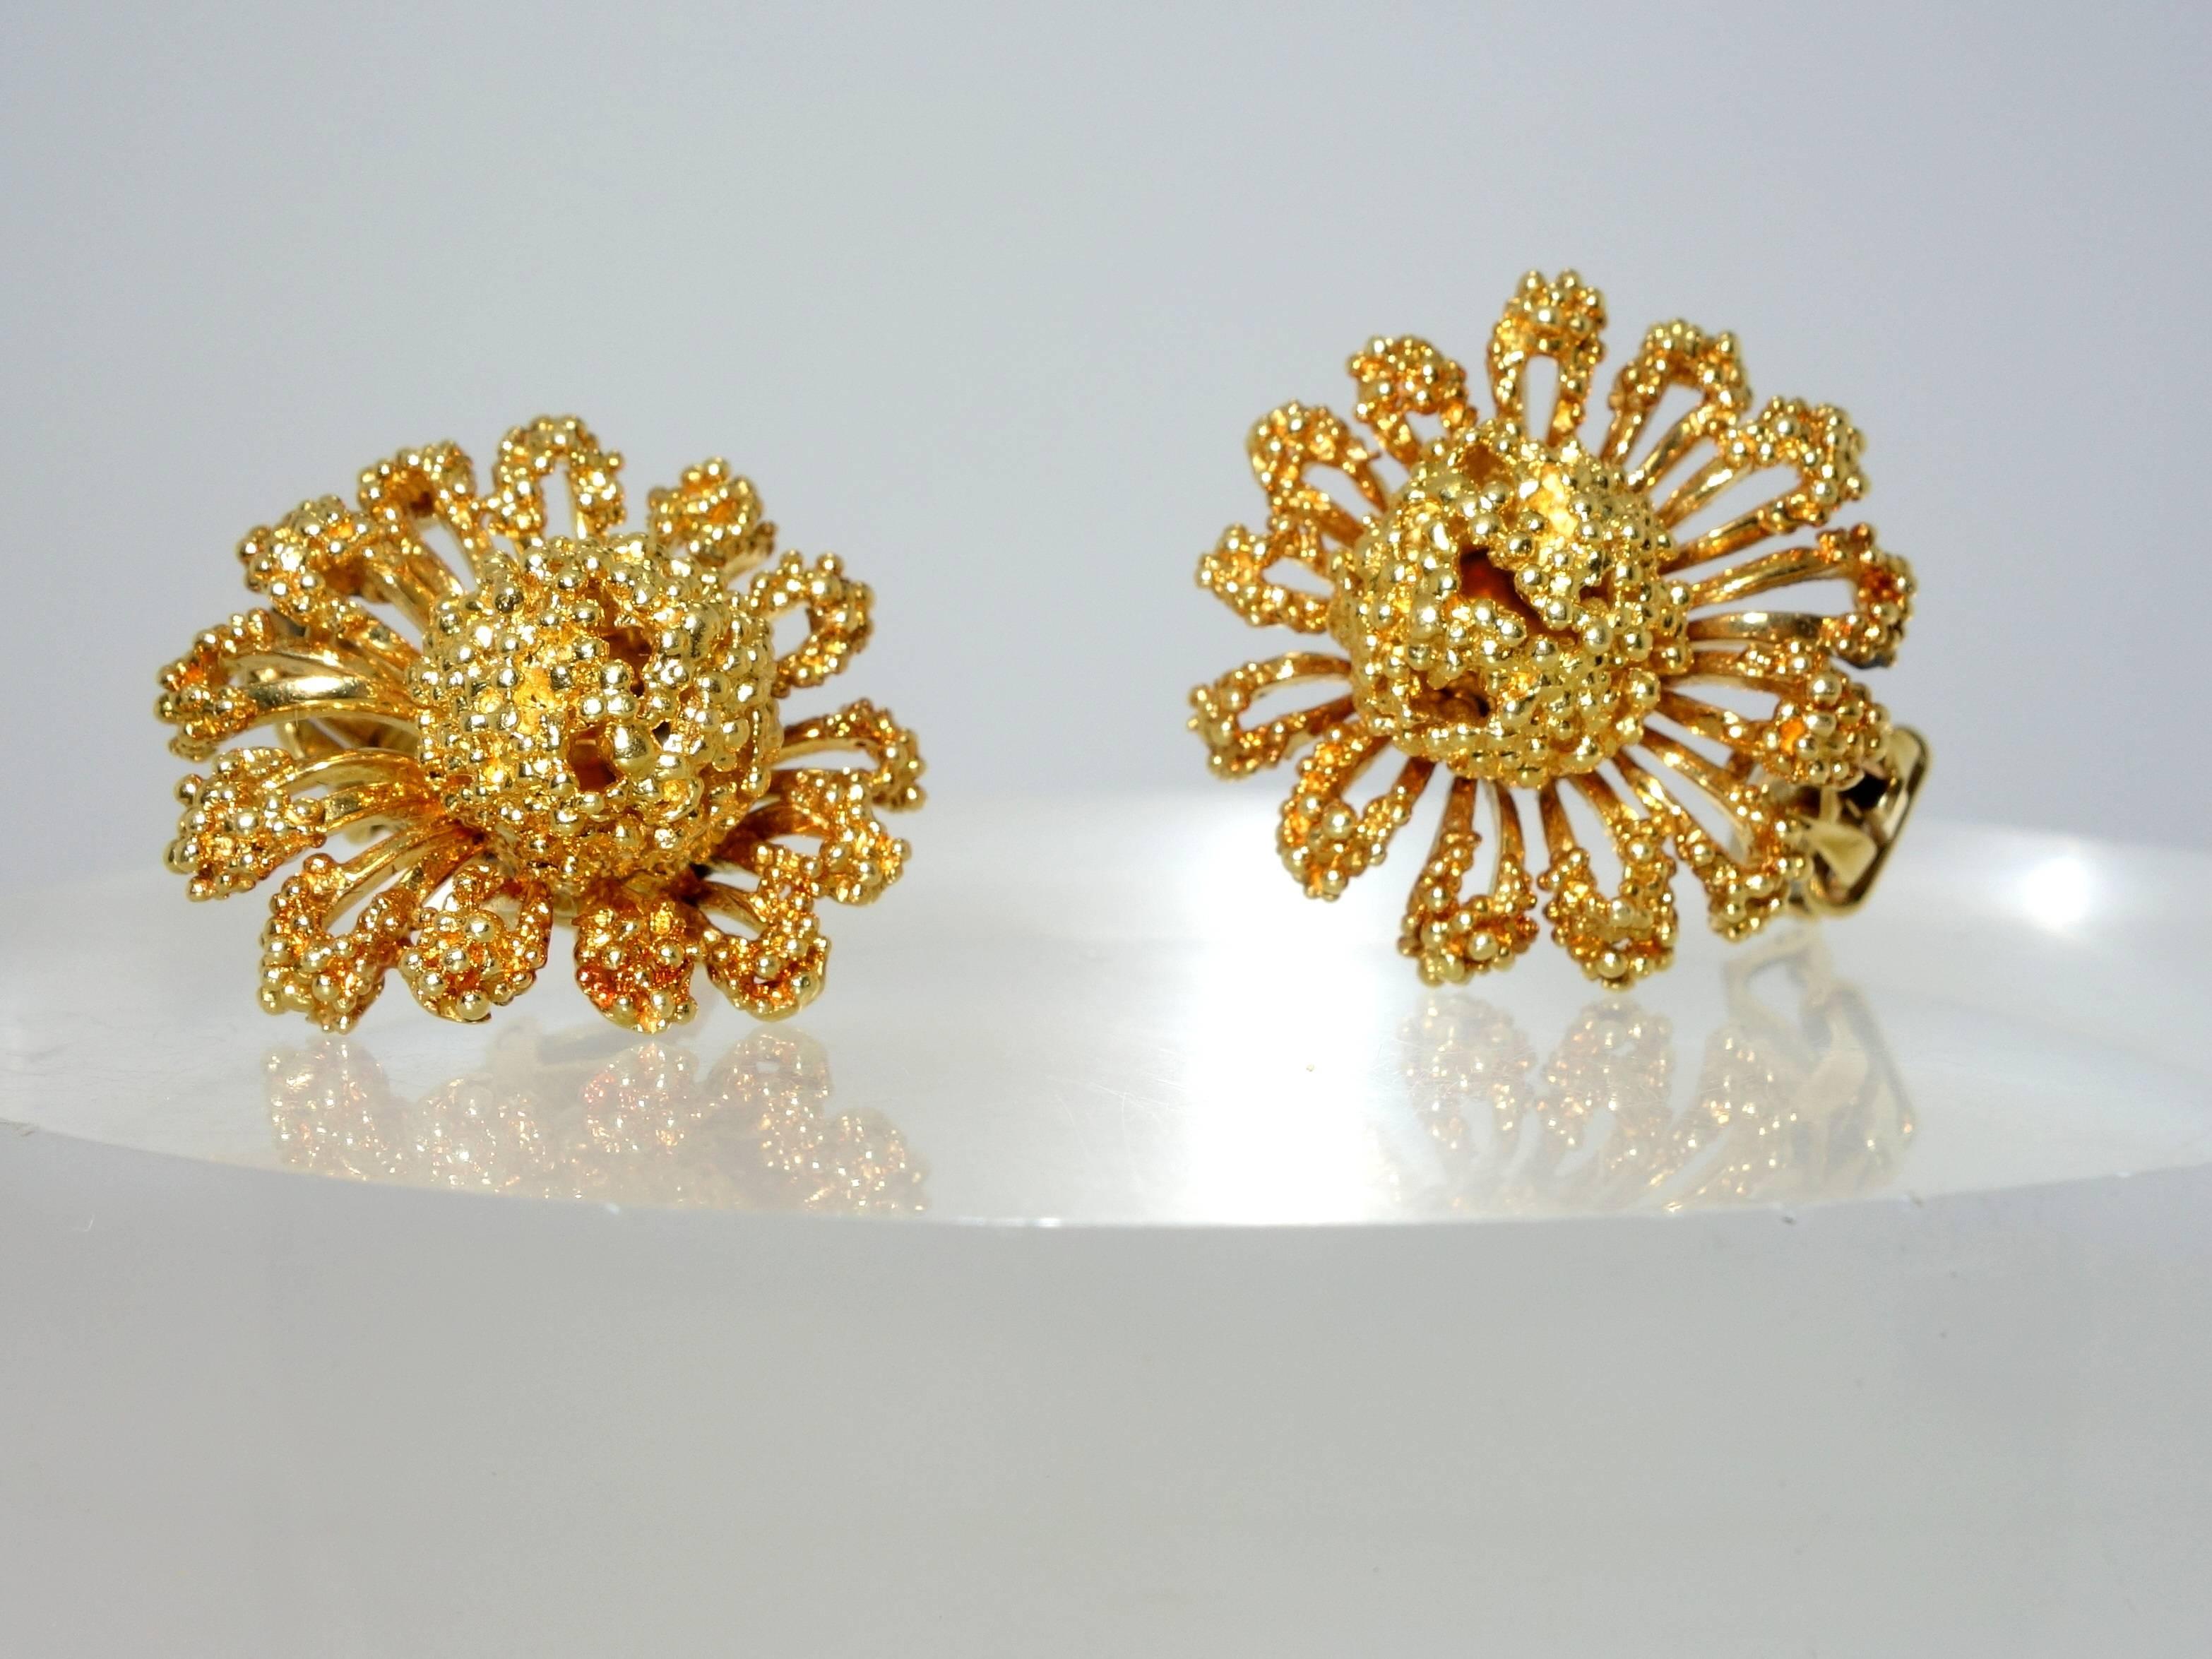 Abstract flowers in bright 18K yellow gold weigh 26.26 grams (about 85% of 1 troy ounce), and spread one inch on the ear.  These date to the early 1960's when jewels were supposed to be both feminine and supremely sophisticated.  These earrings can